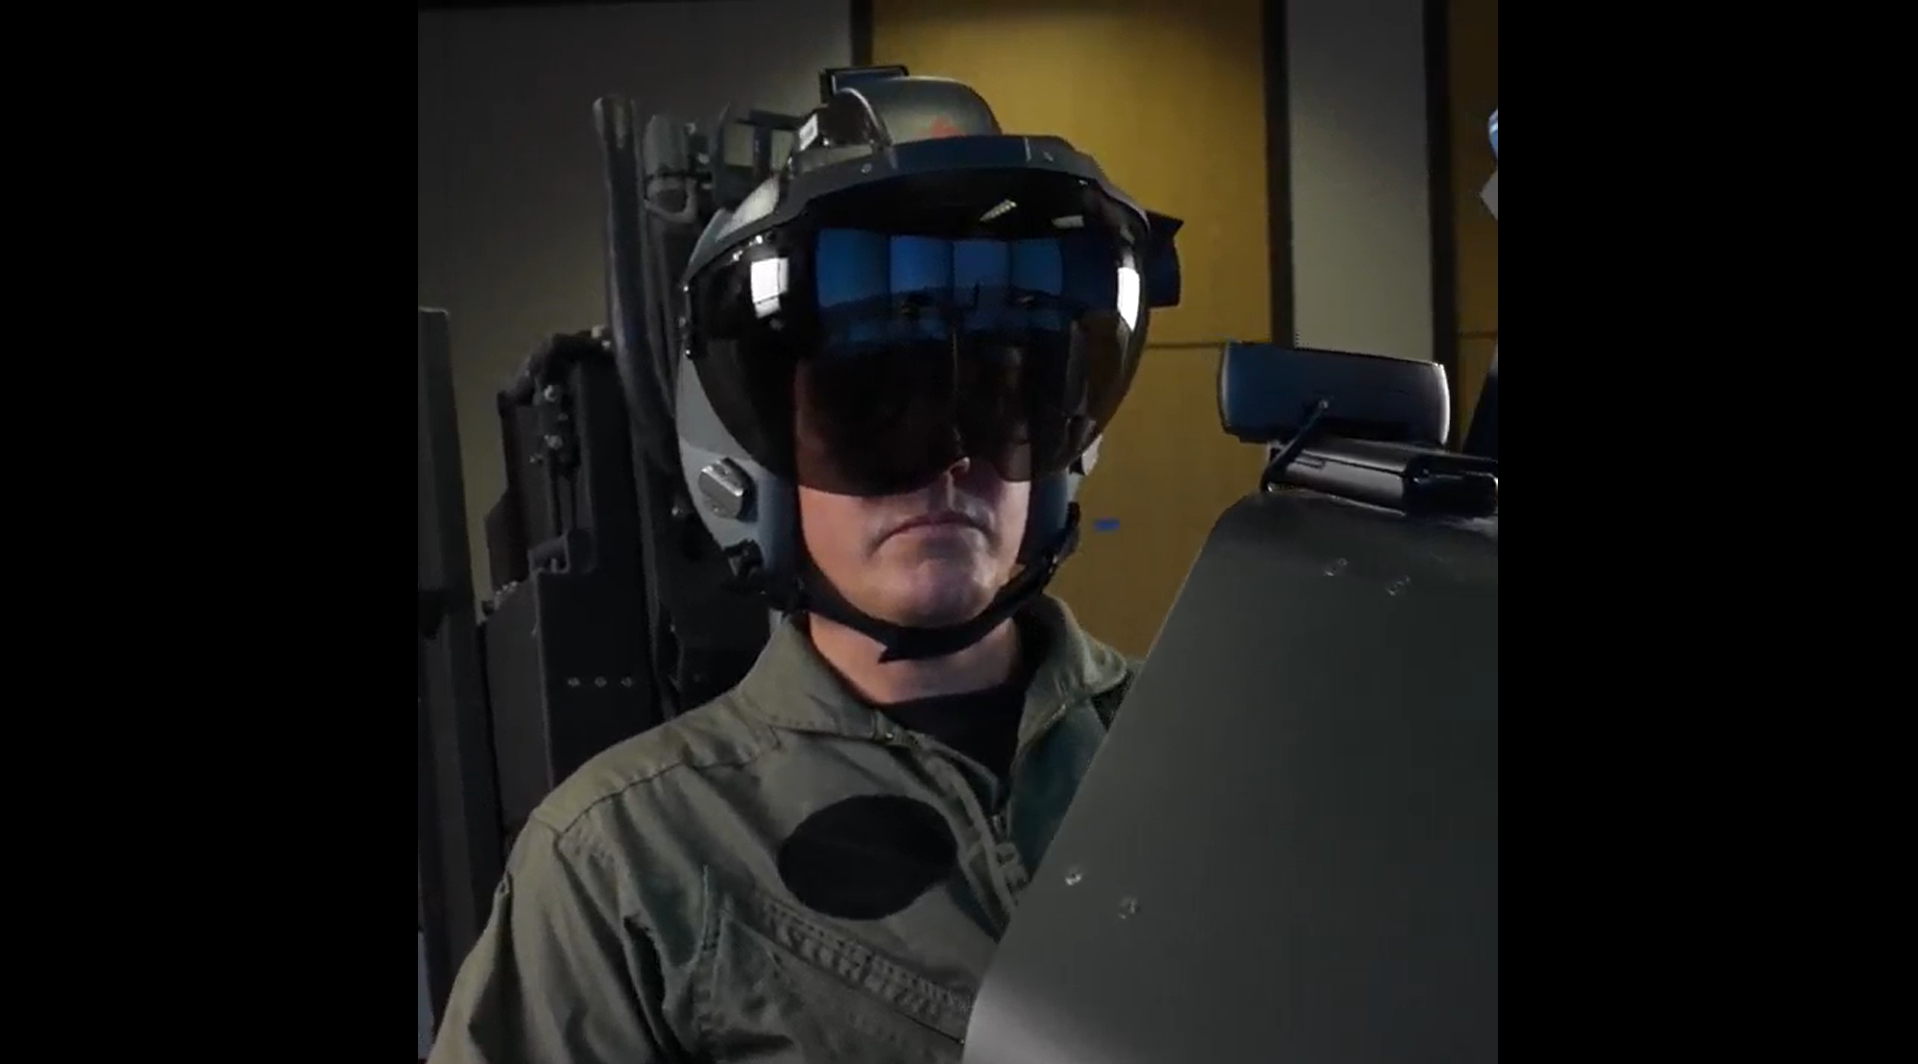 Red 6 Integration with TF-50 Simulator Demonstrates Lockheed Martin’s Vision for TF-50 AR Pilot Training